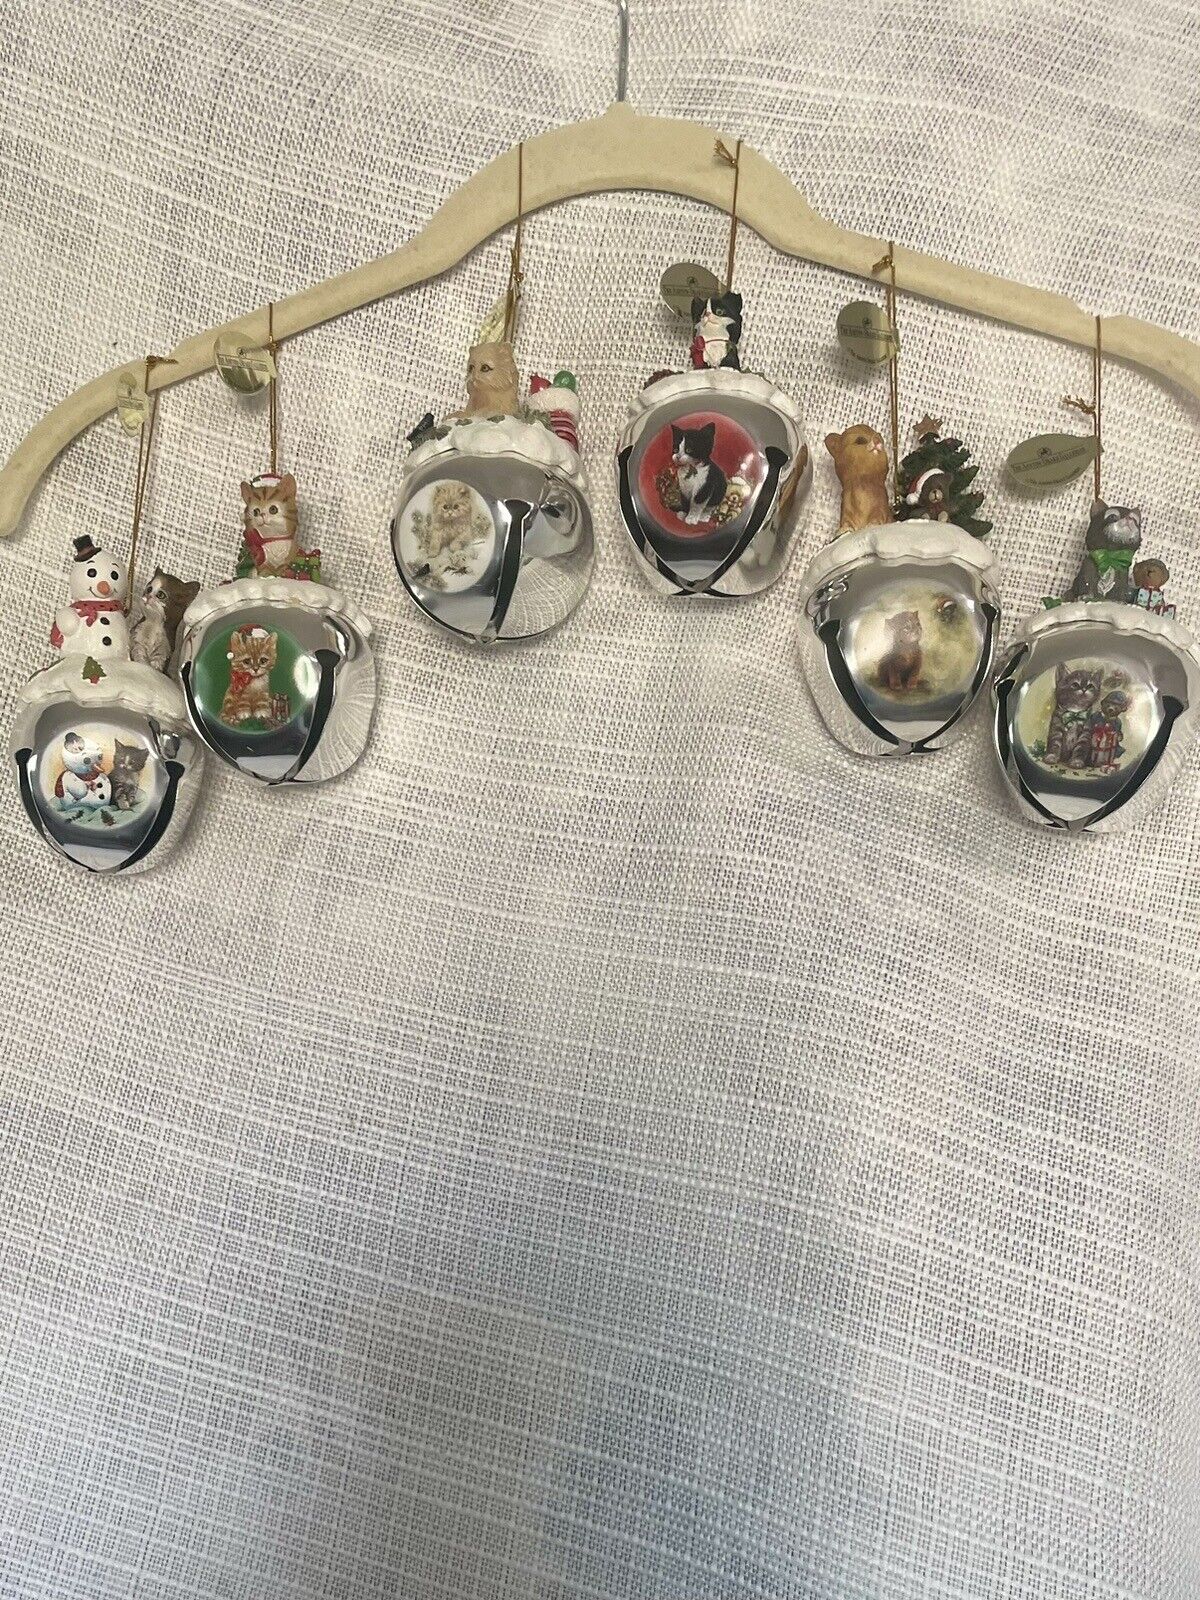 The Ashton Drake “Purrfect Holiday Sleigh Bells”Ornaments Collection Set of 6